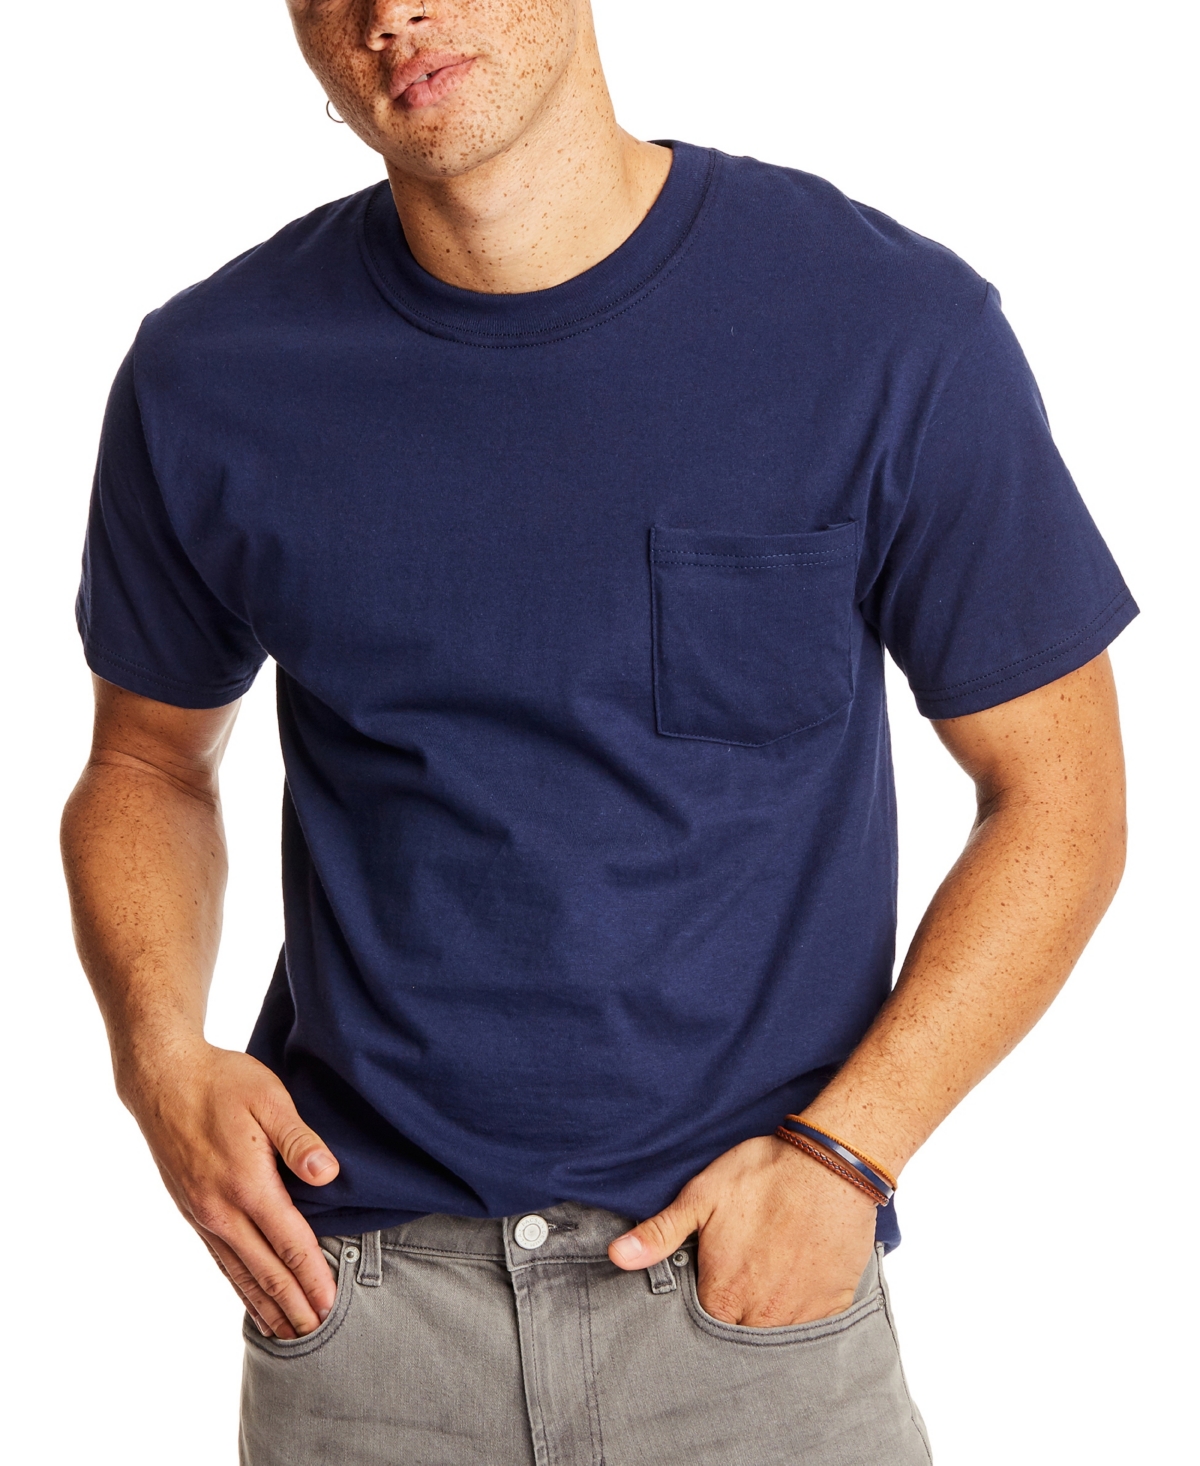 Hanes Beefy-t Unisex Pocket T-shirt, 2-pack In Navy